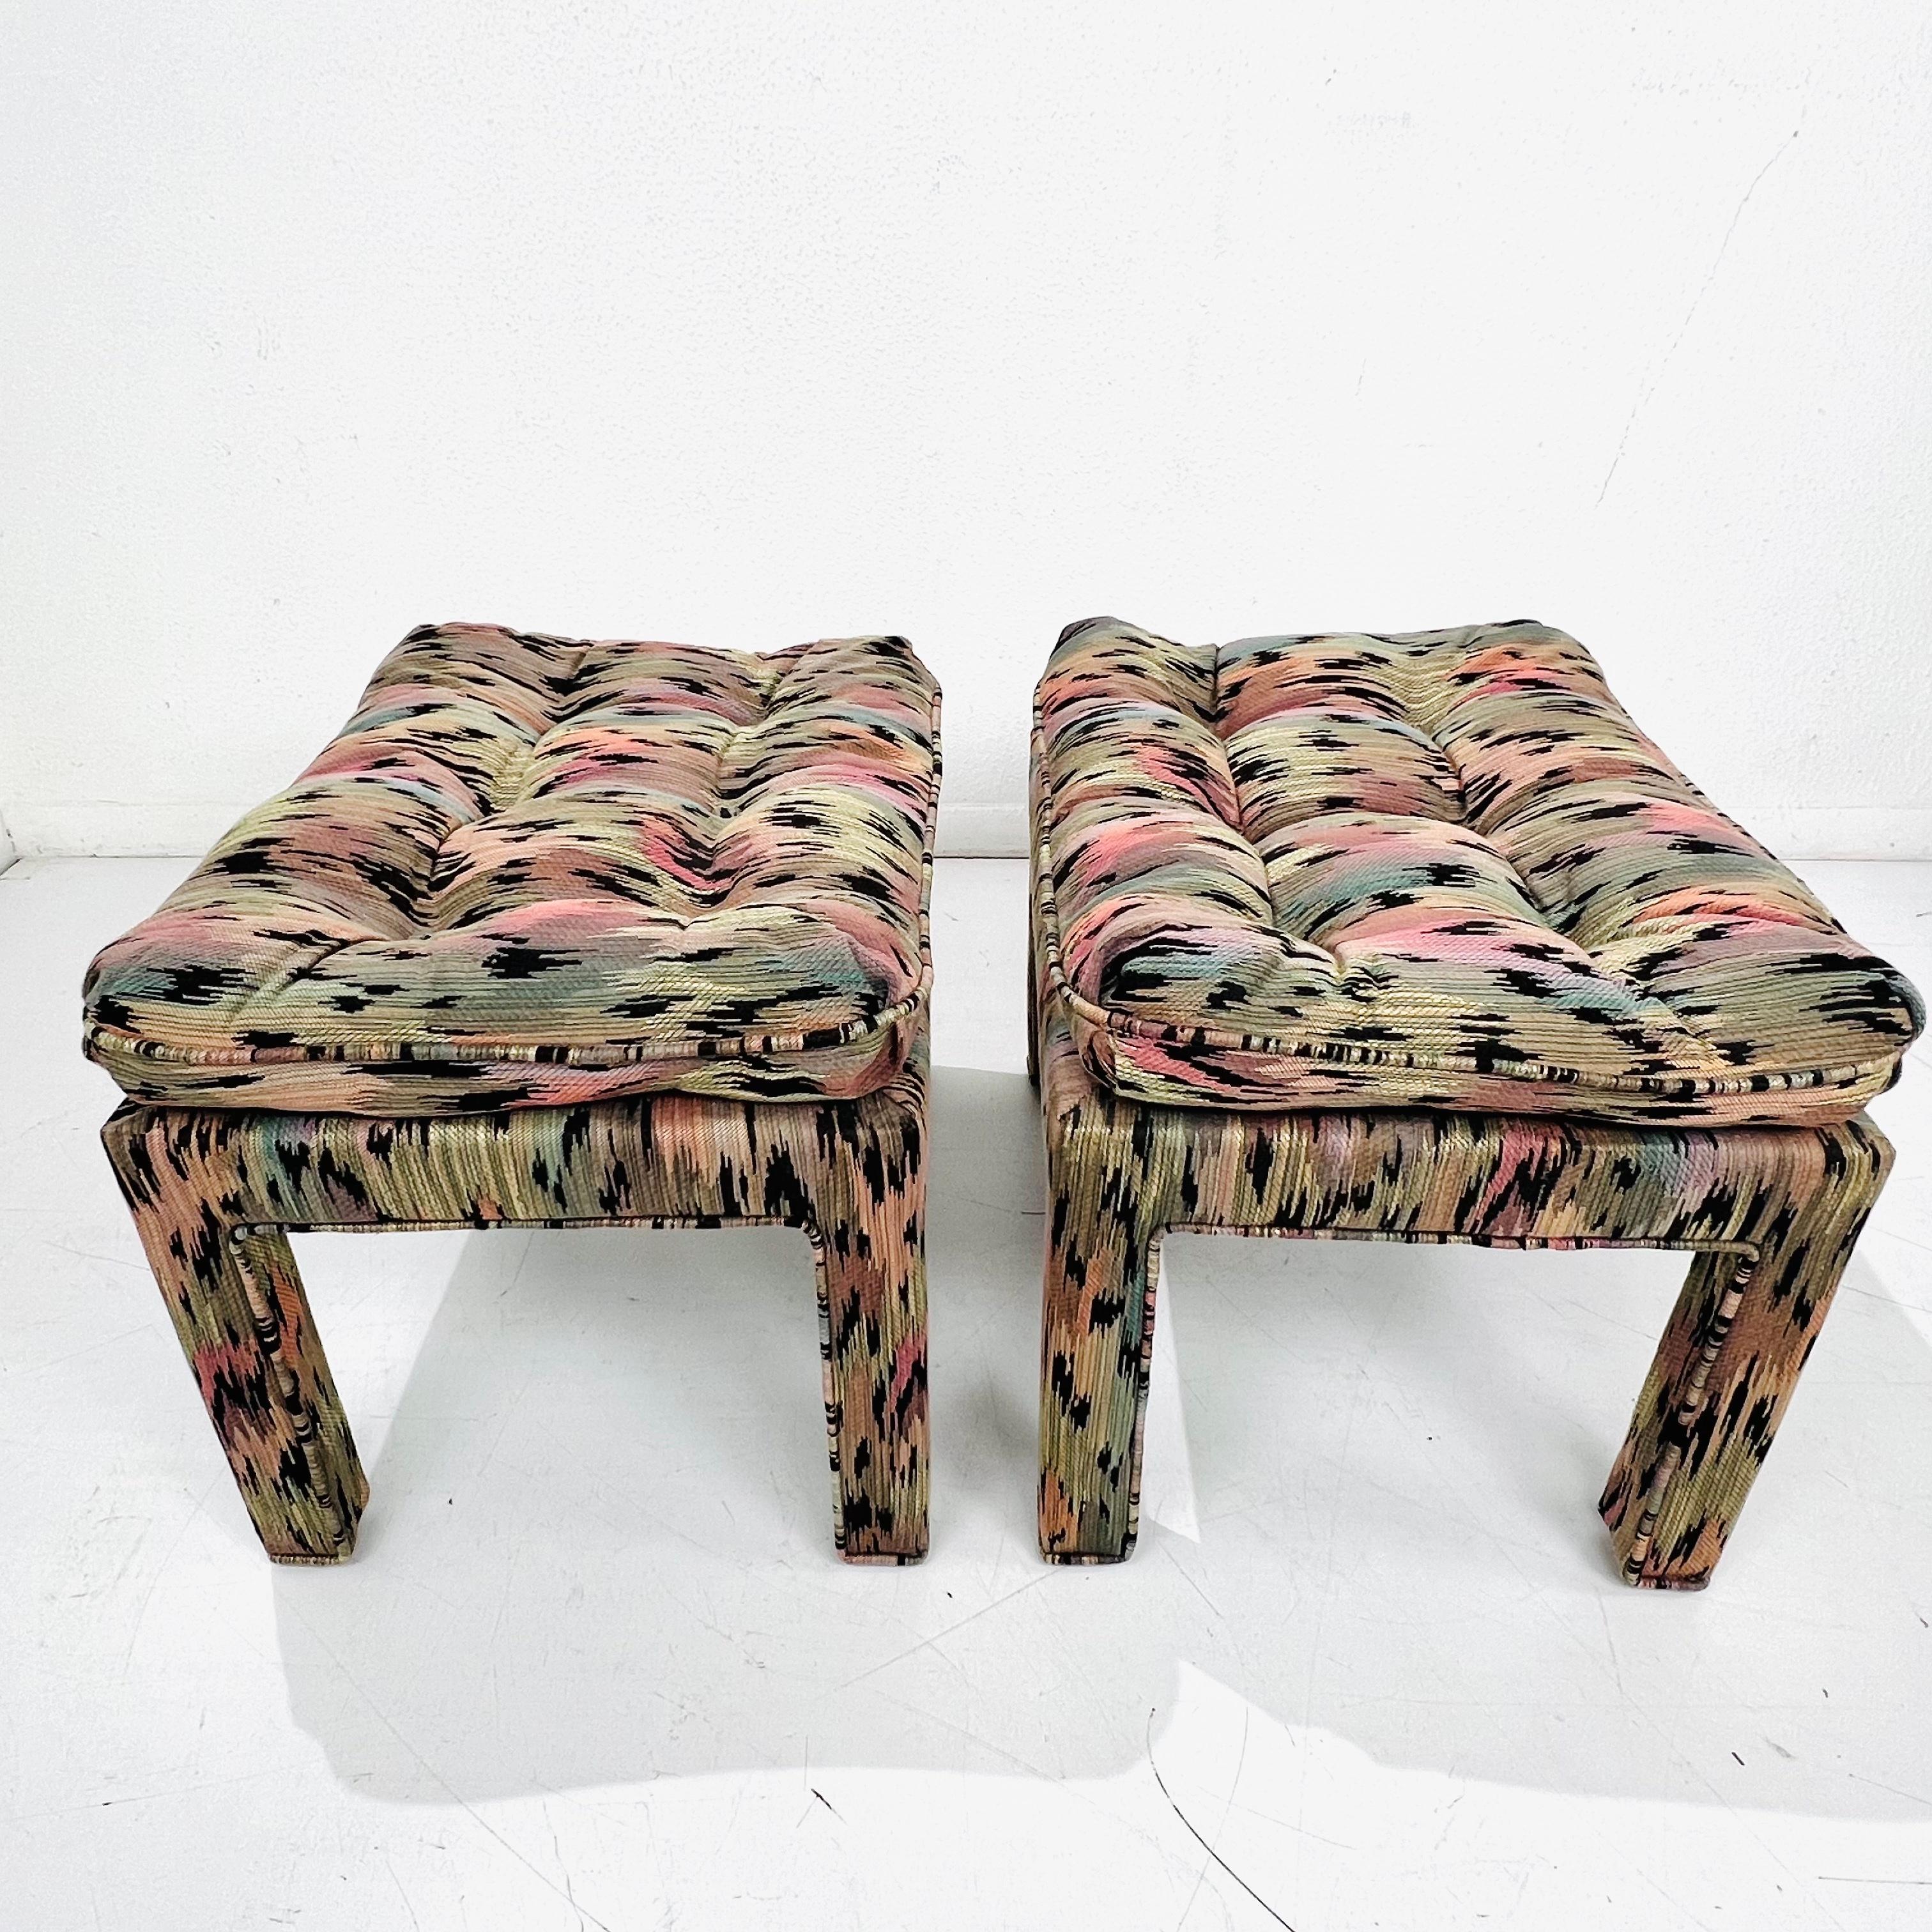 Super sexy pair of 1970s Parsons style ottomans or stools in sultry rainbow leopard with piping detail. Tufted top cushion is complimented with upholstered piped legs. A timeless Silhouette in a fierce fabric! Very good condition, no stains or tears